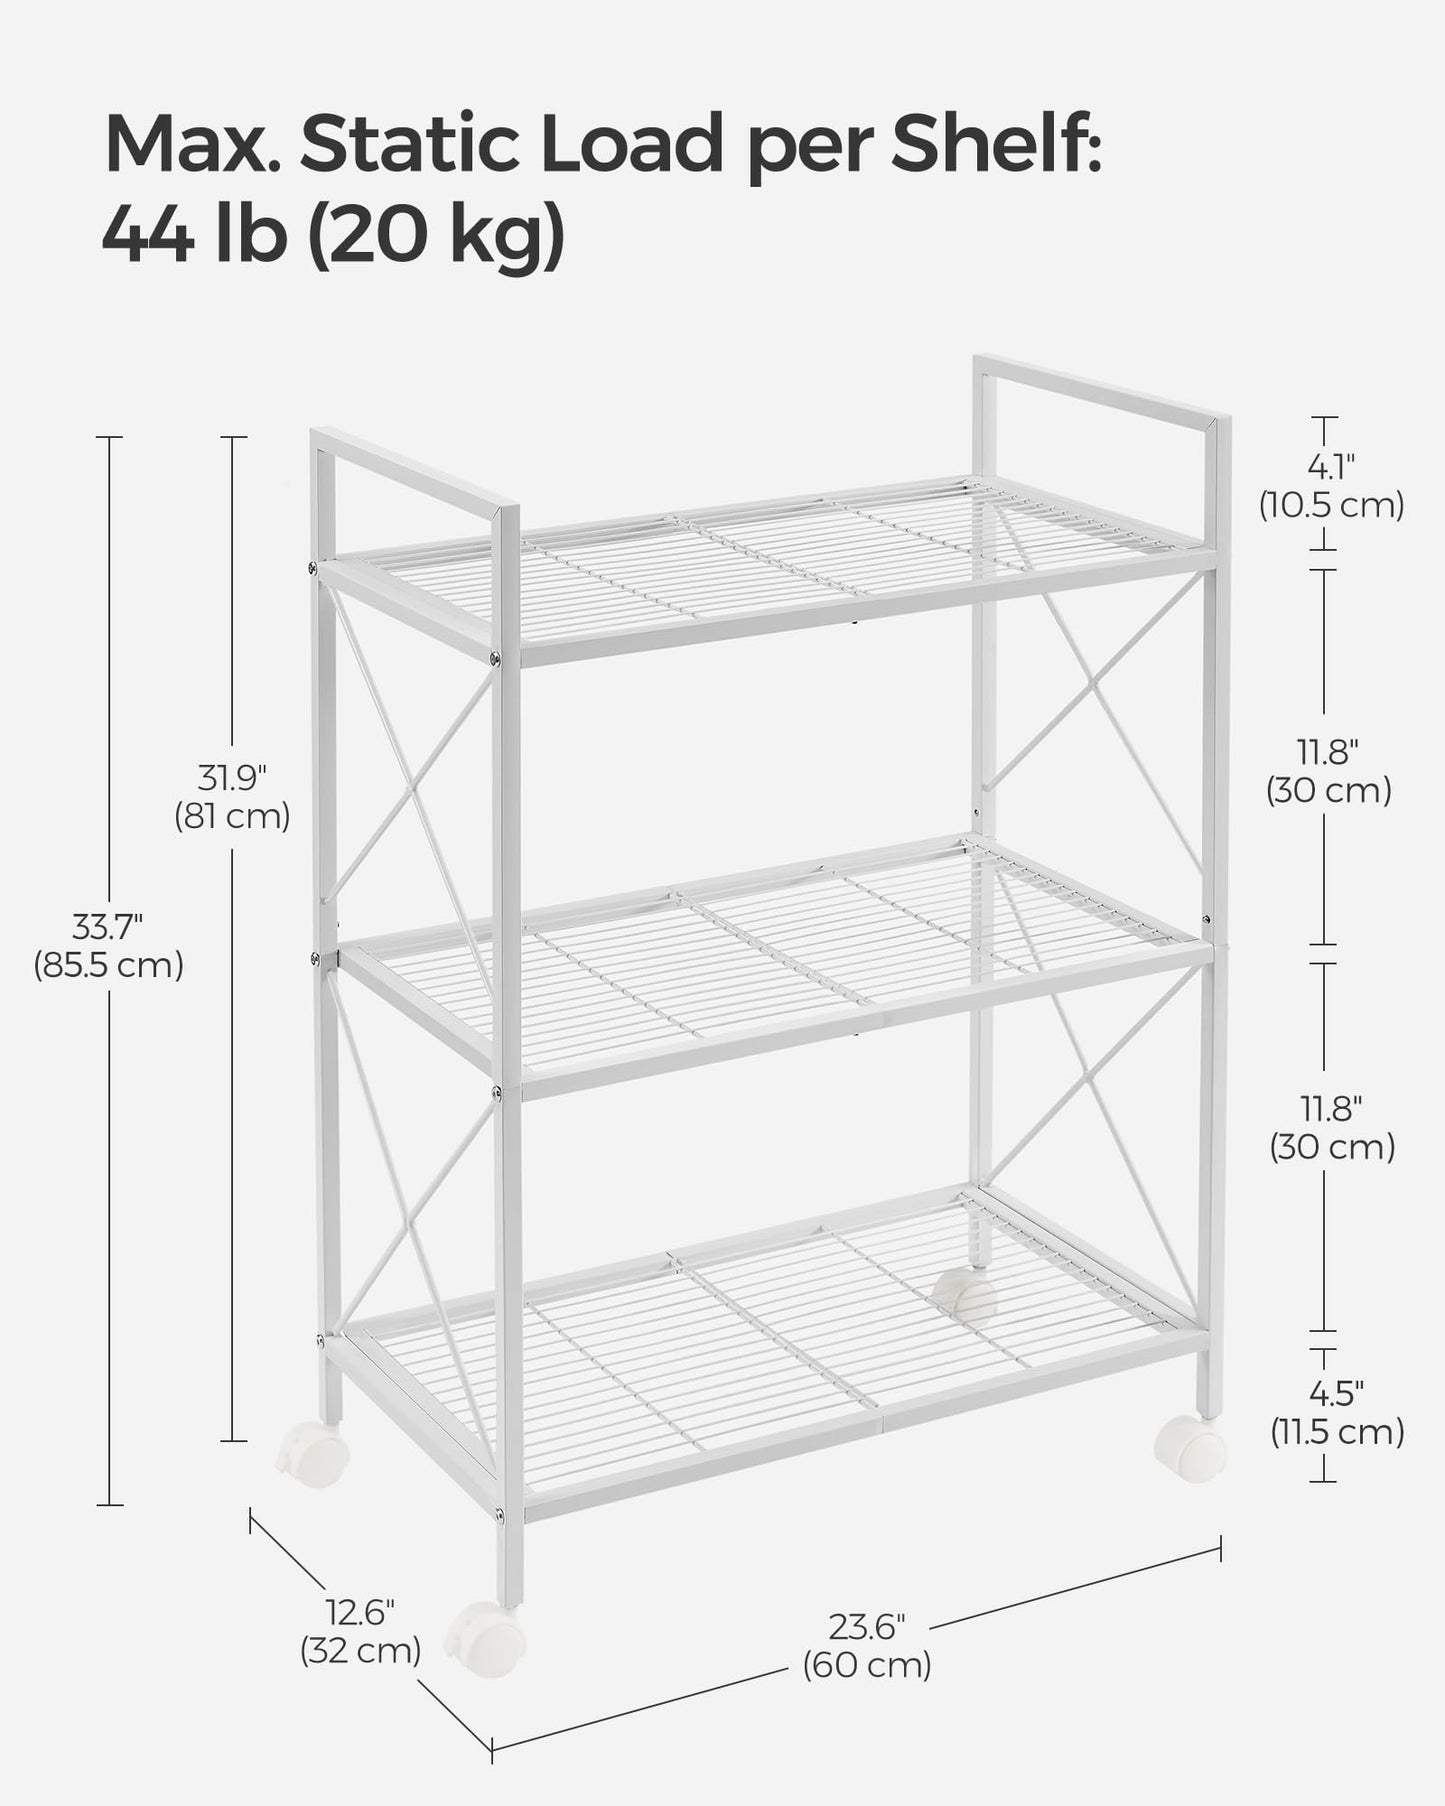 SONGMICS 3-Tier Metal Storage Rack with Wheels, Mesh Shelving Unit with X Side Frames, 23.6-Inch Width, for Entryway, Kitchen, Living Room, Bathroom,